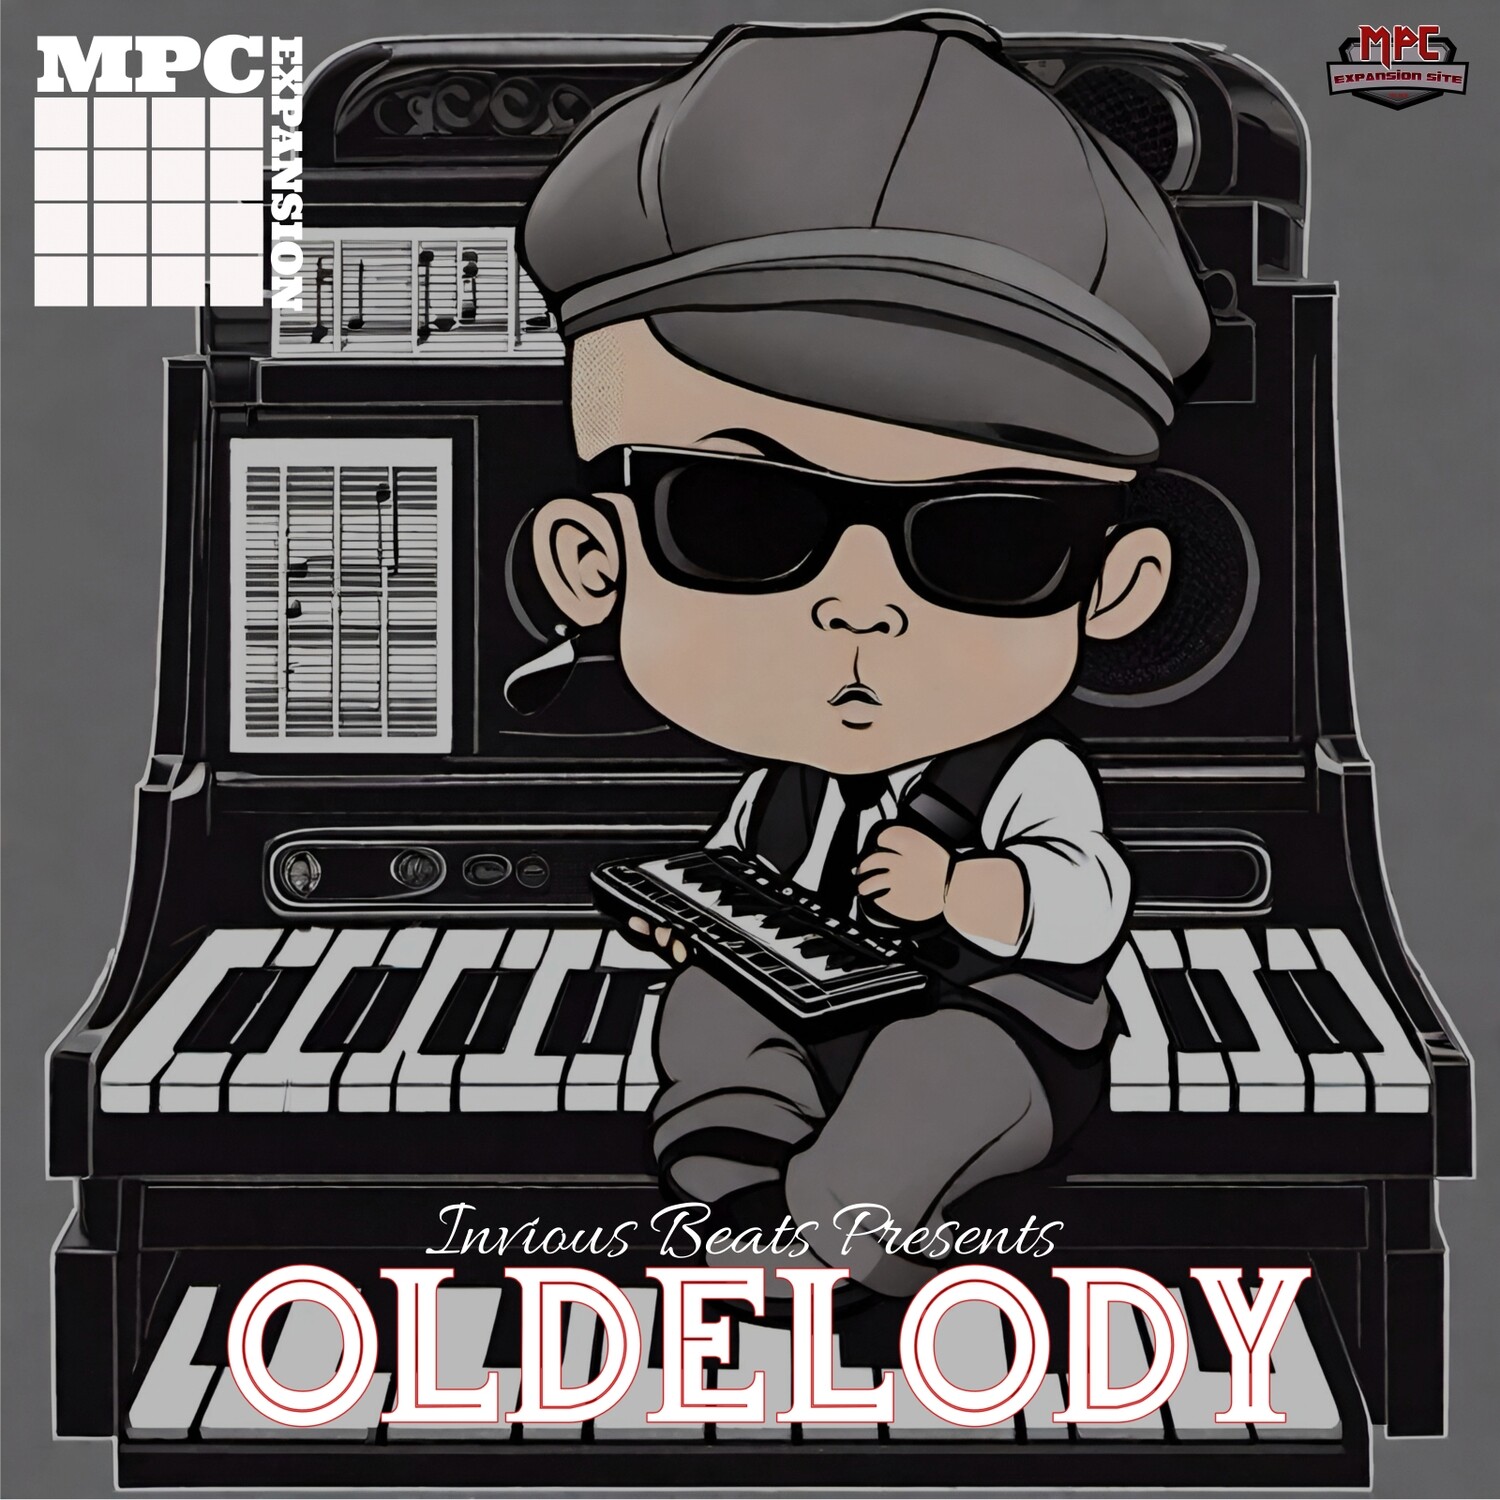 MPC EXPANSION 'OLDELODY' by INVIOUS